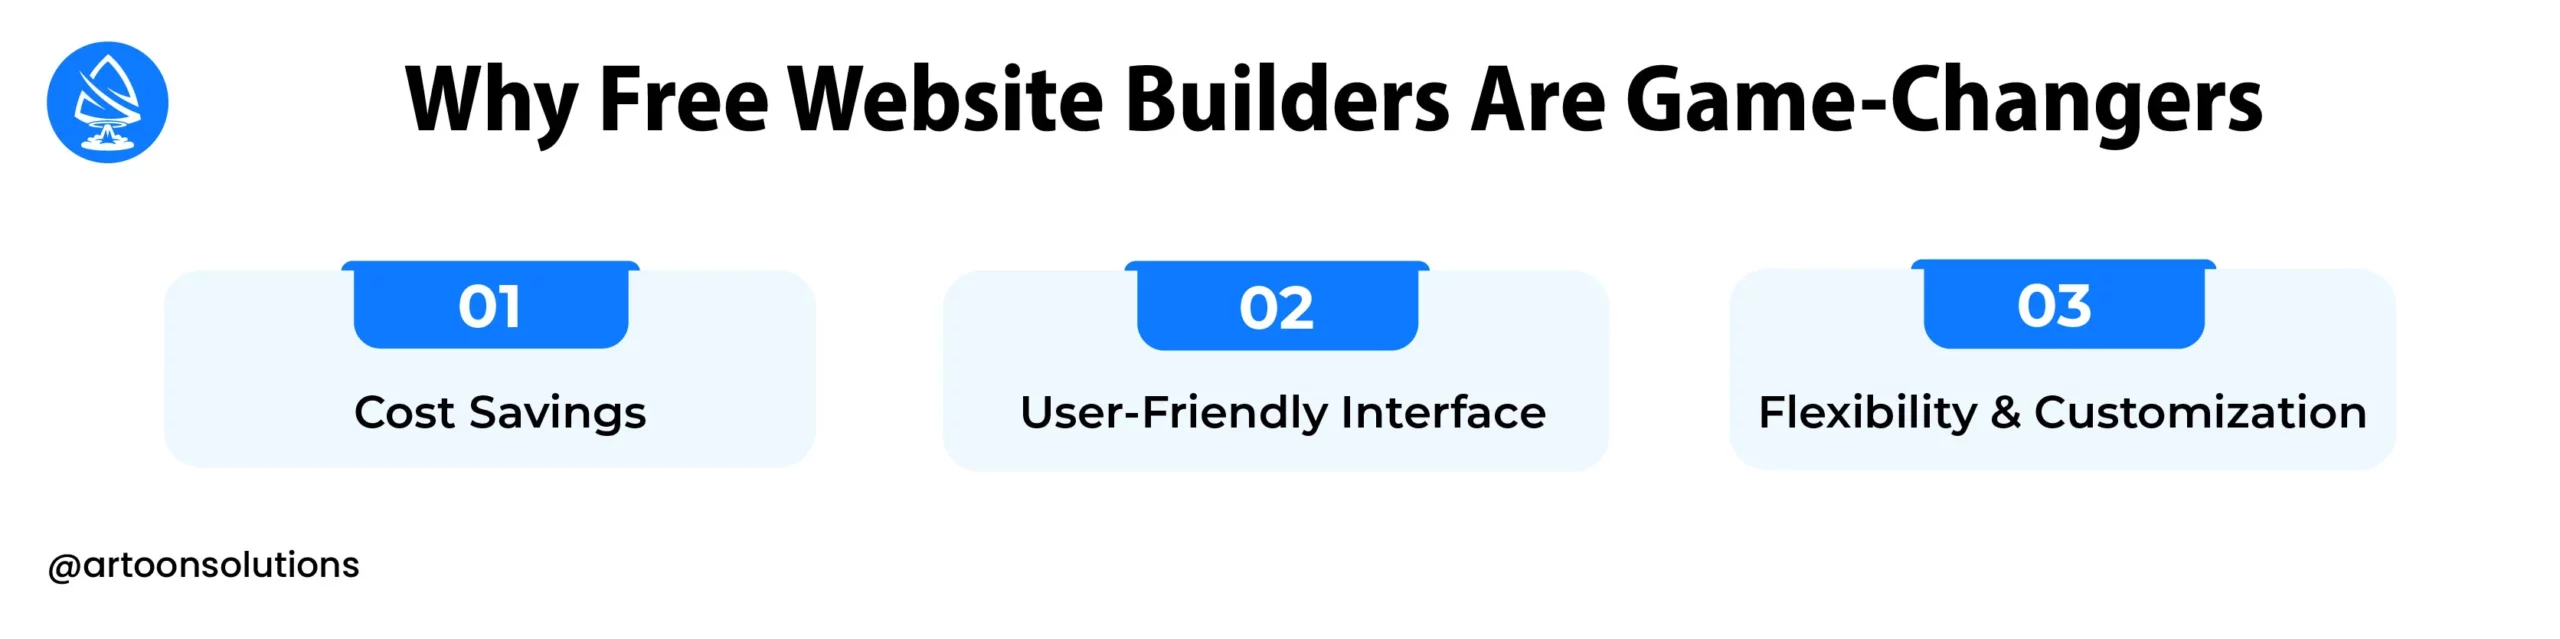 Why Free Website Builders Are Game-Changers